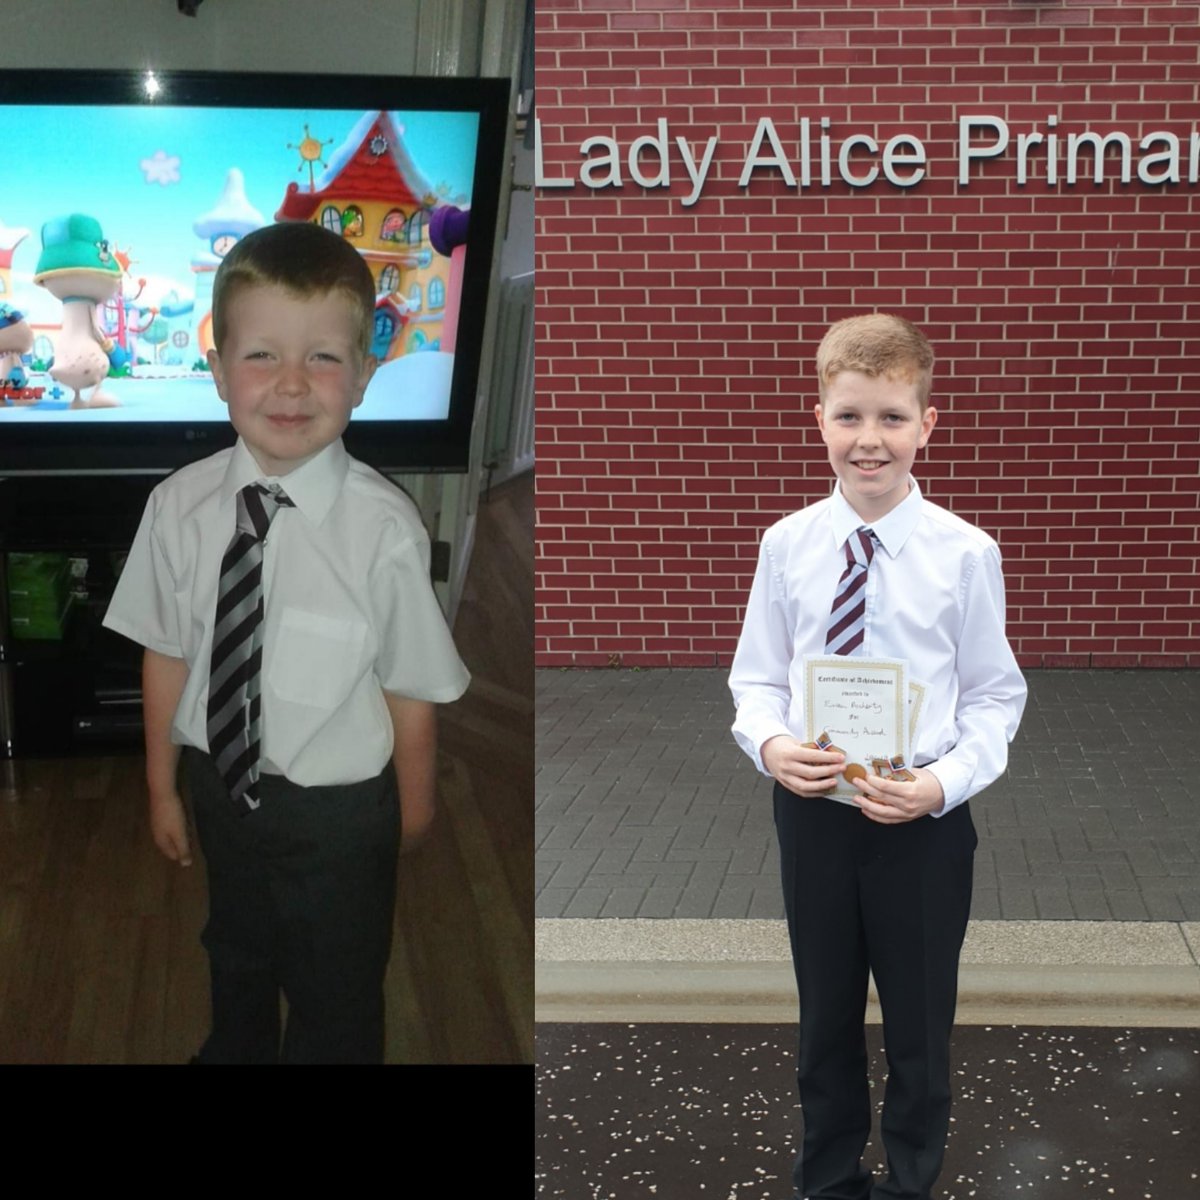 First and Last day of Primary. We are so proud of Ewan's achievements. A special thankyou to @MissMcShane_LA  for giving up your Saturday mornings cheering on all the X country runners at Towerhill. Memories Ewan will hold fondly. Wishing all the @P7MRC_LA kids all the very best!